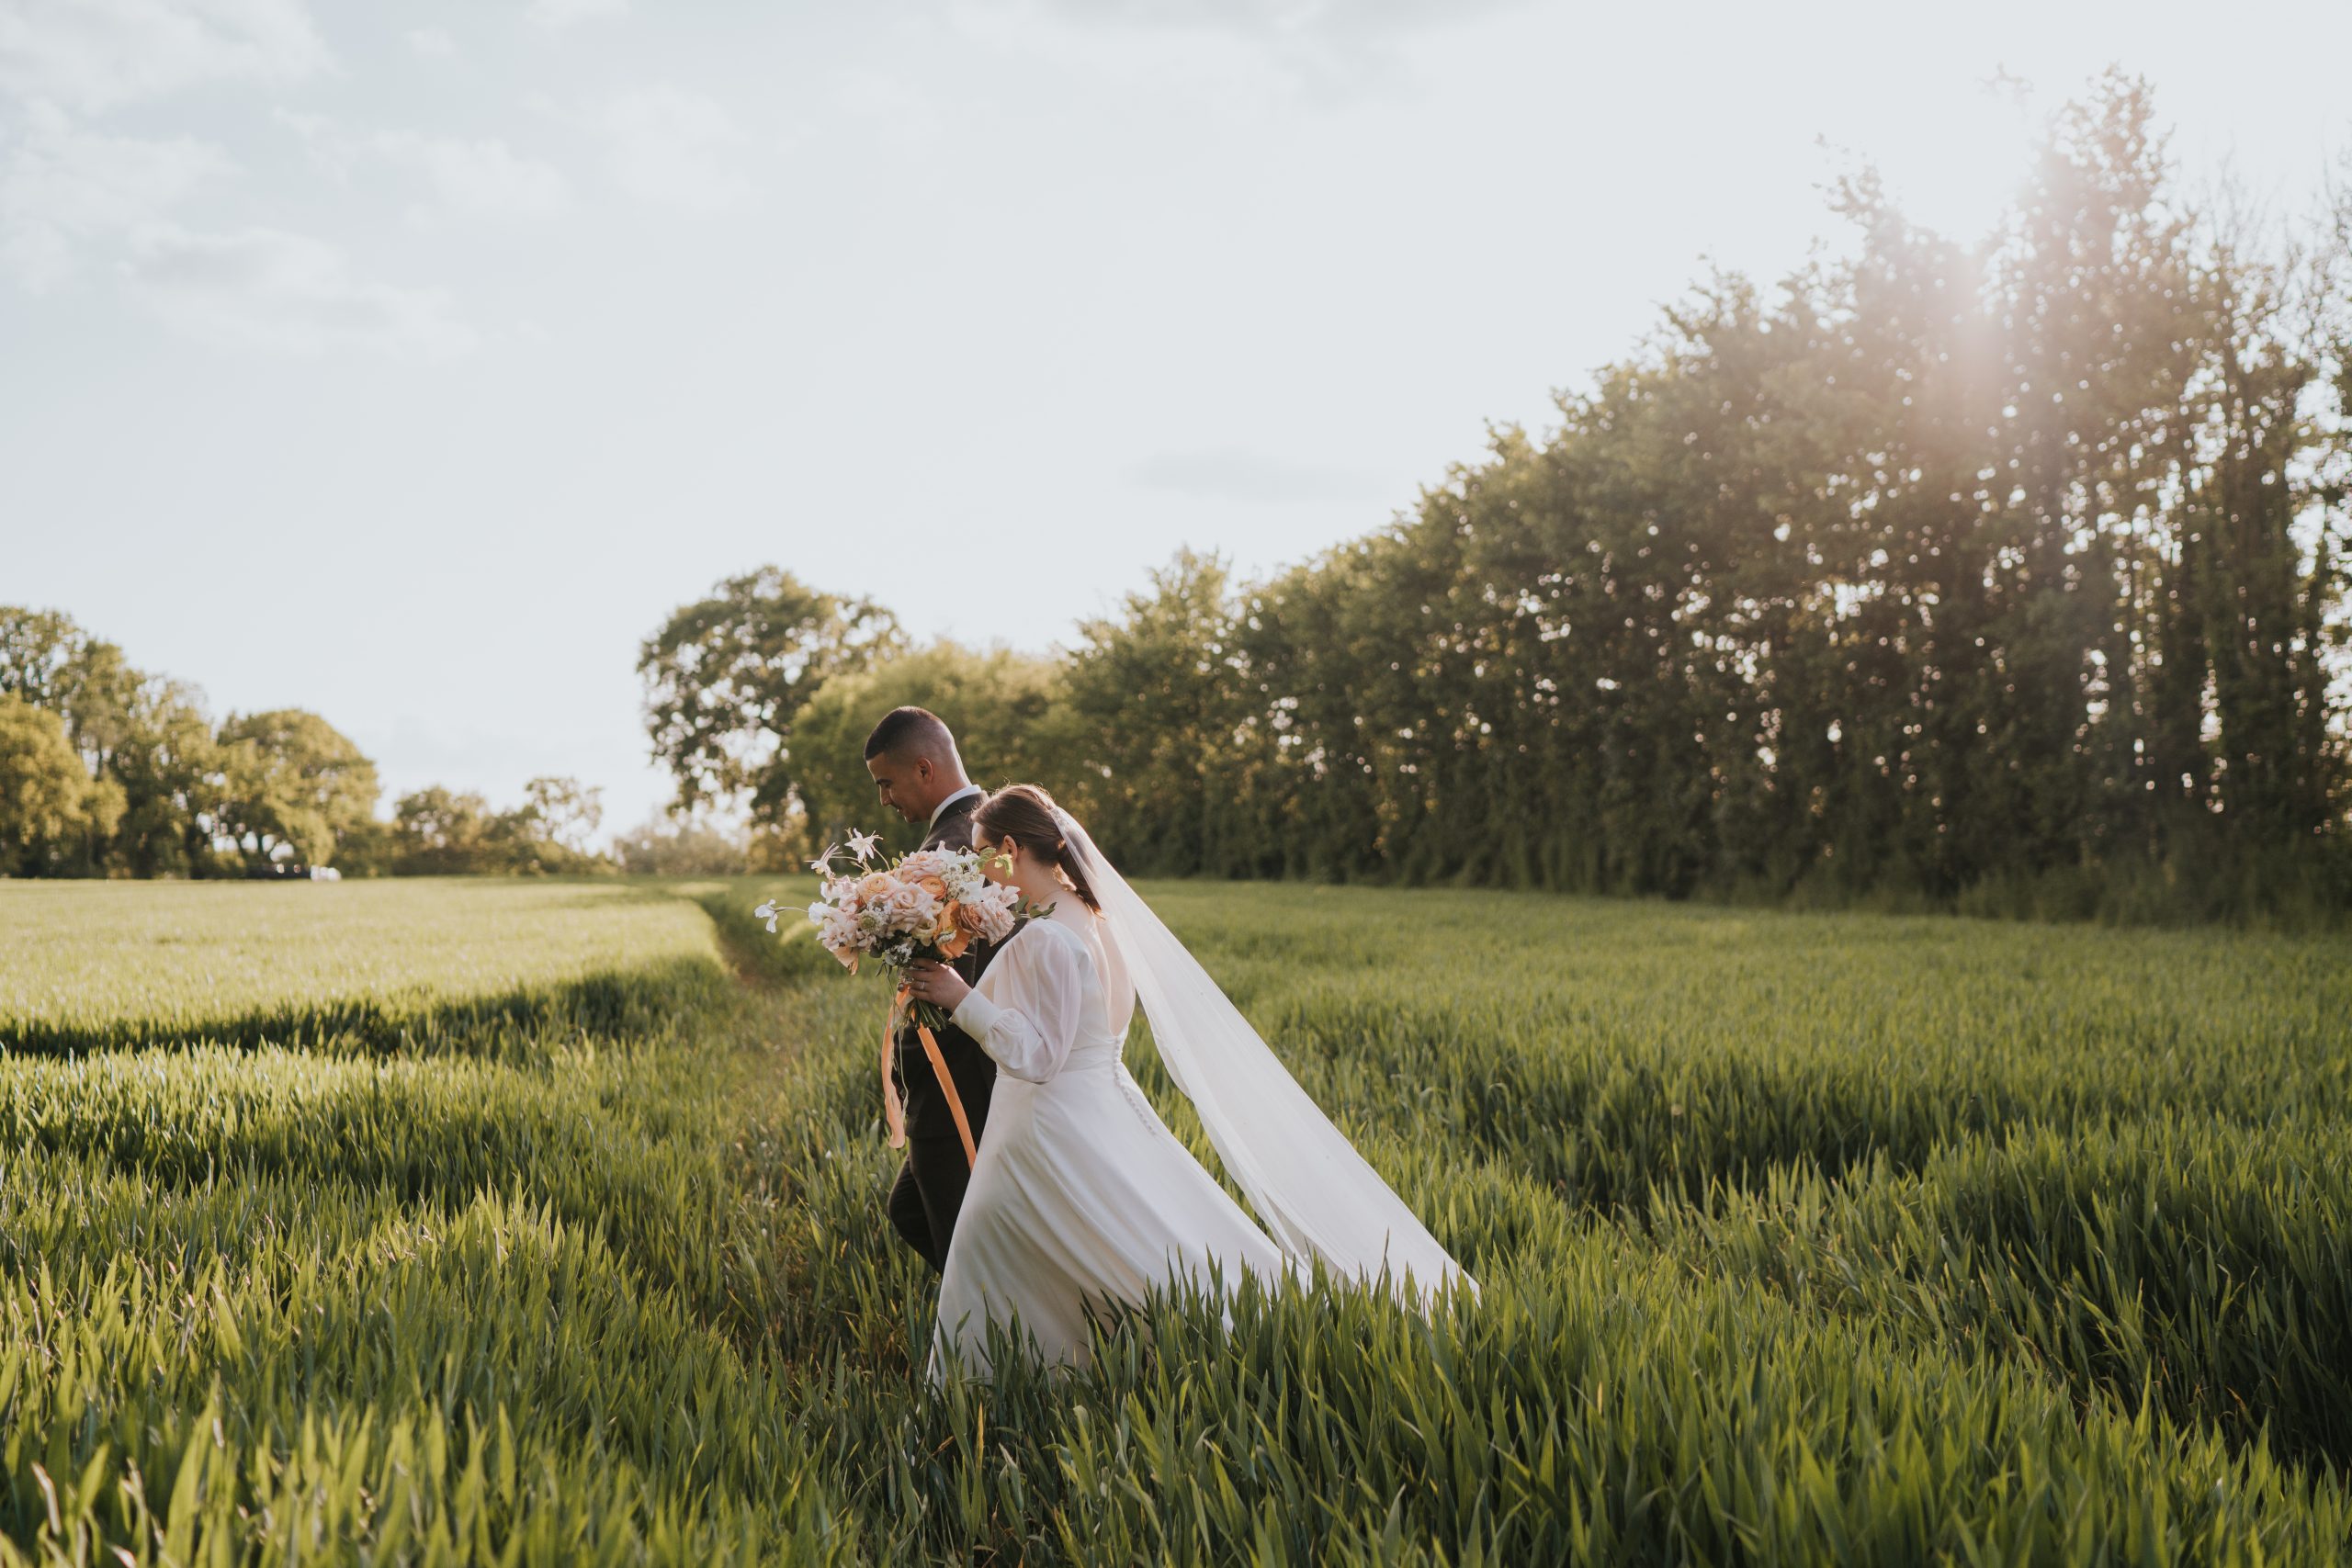 Intimate Wedding Photography for the Wildly in Love